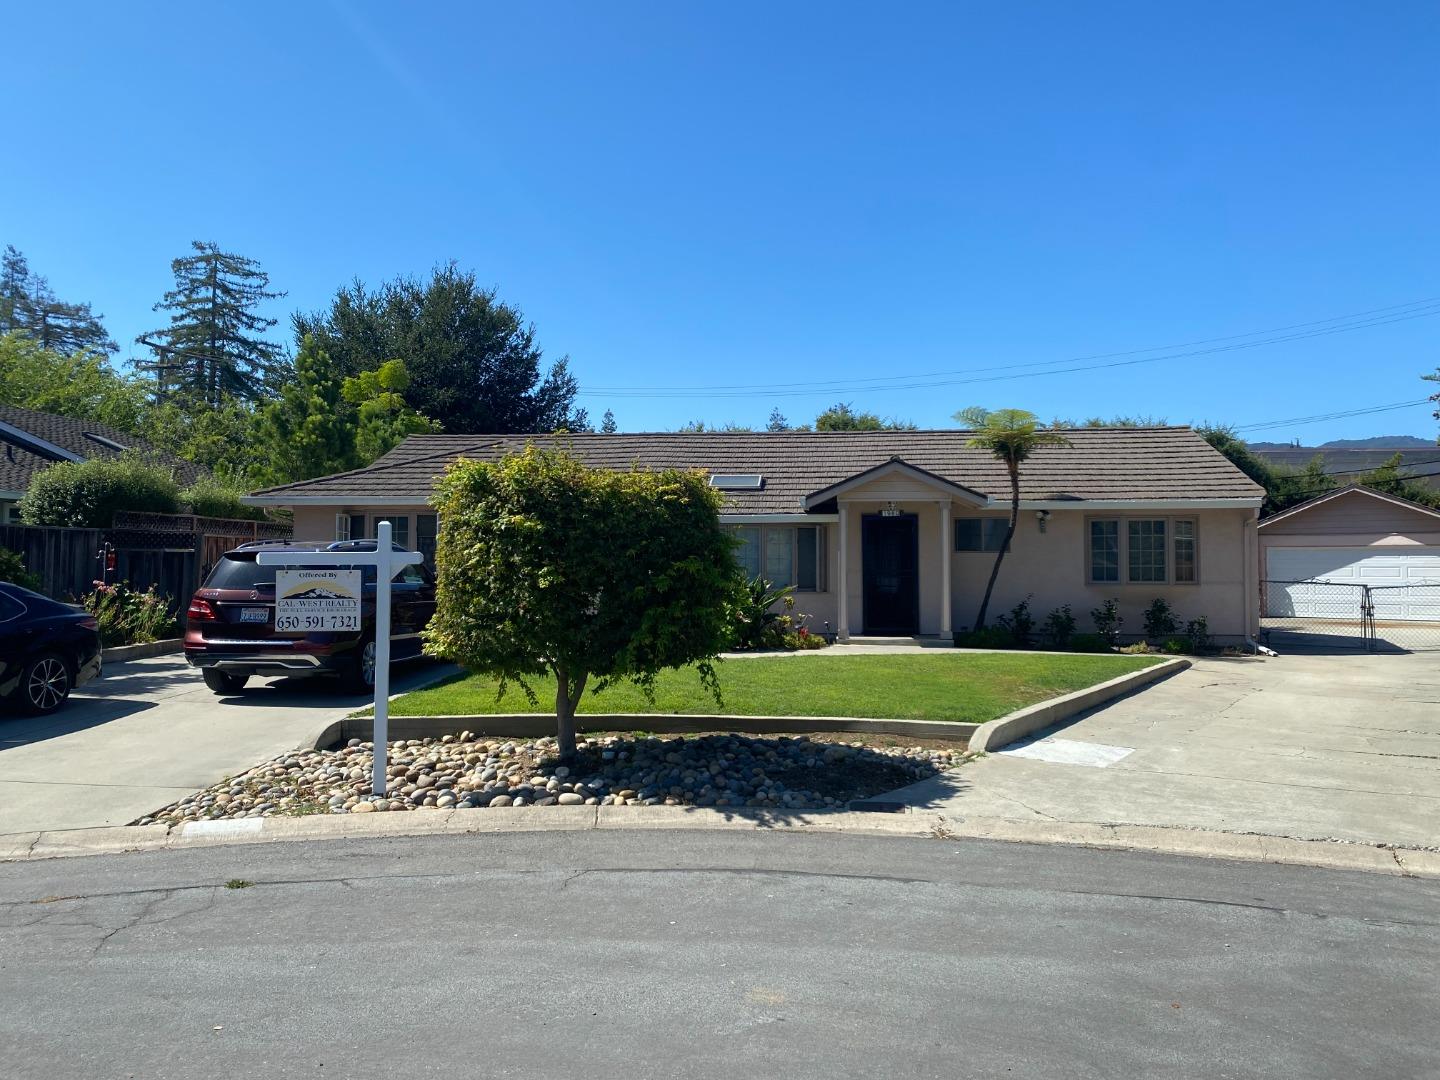 This lovely home is being offered after decades of raising a busy family.  You have many options available to you to reconfigure & remodel or even rebuild on the 11,000+ sf level lot.  Conveniently located near Foothill Expwy, Hwy 280 and downtown Los Altos.  Plenty of onsite parking plus room for RV, boat or both.  Come take a look!